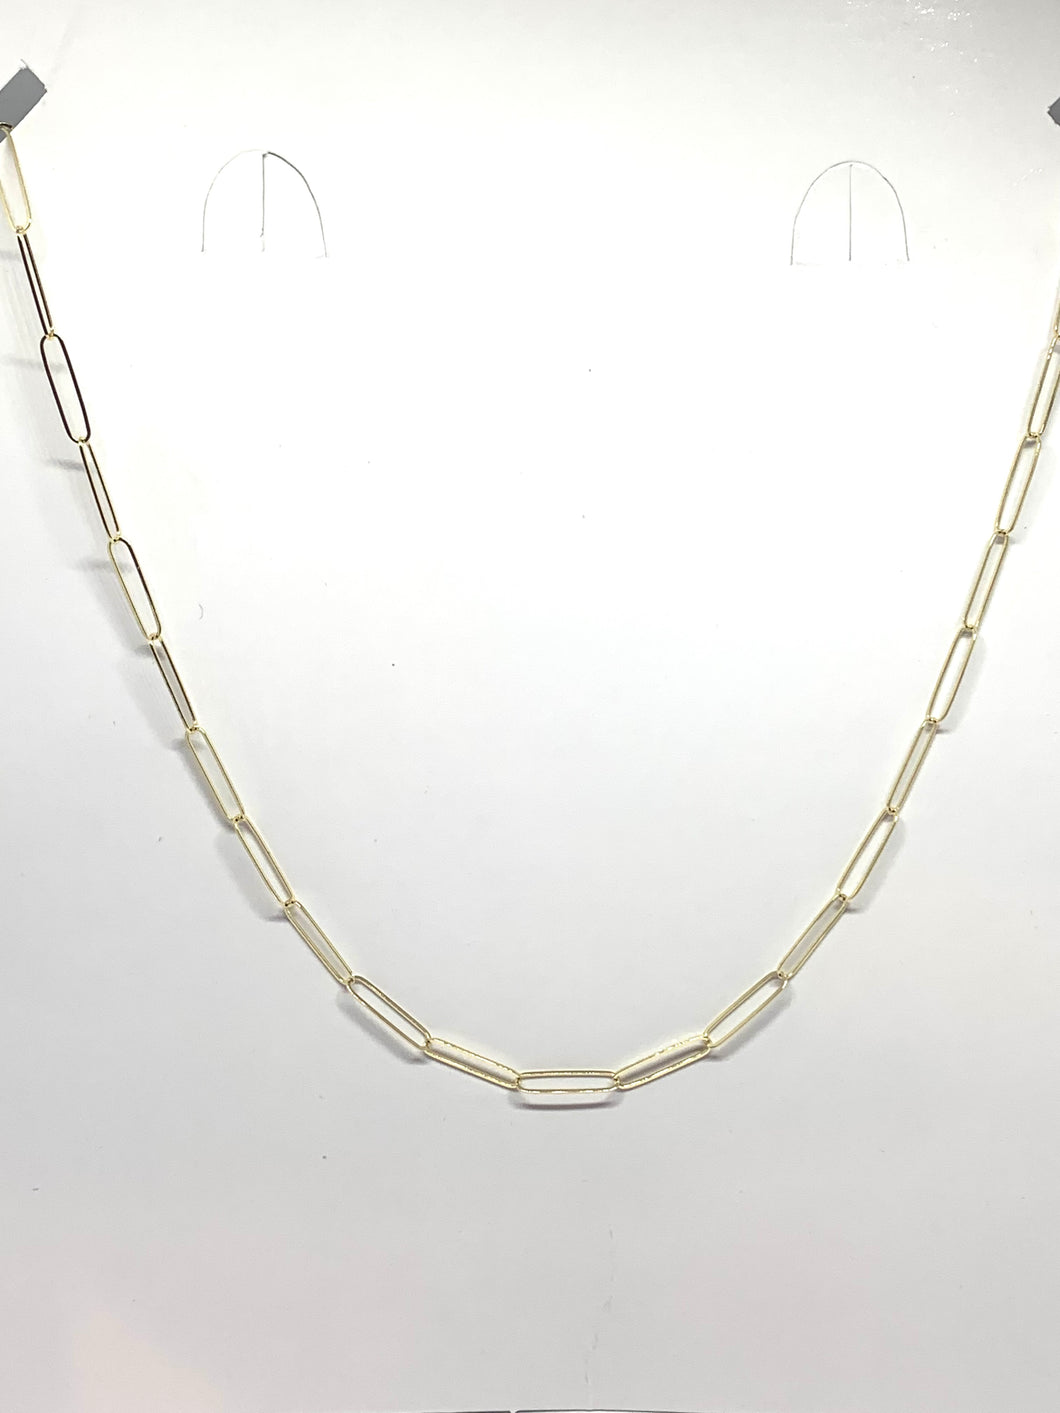 14kt Yellow Gold Chain